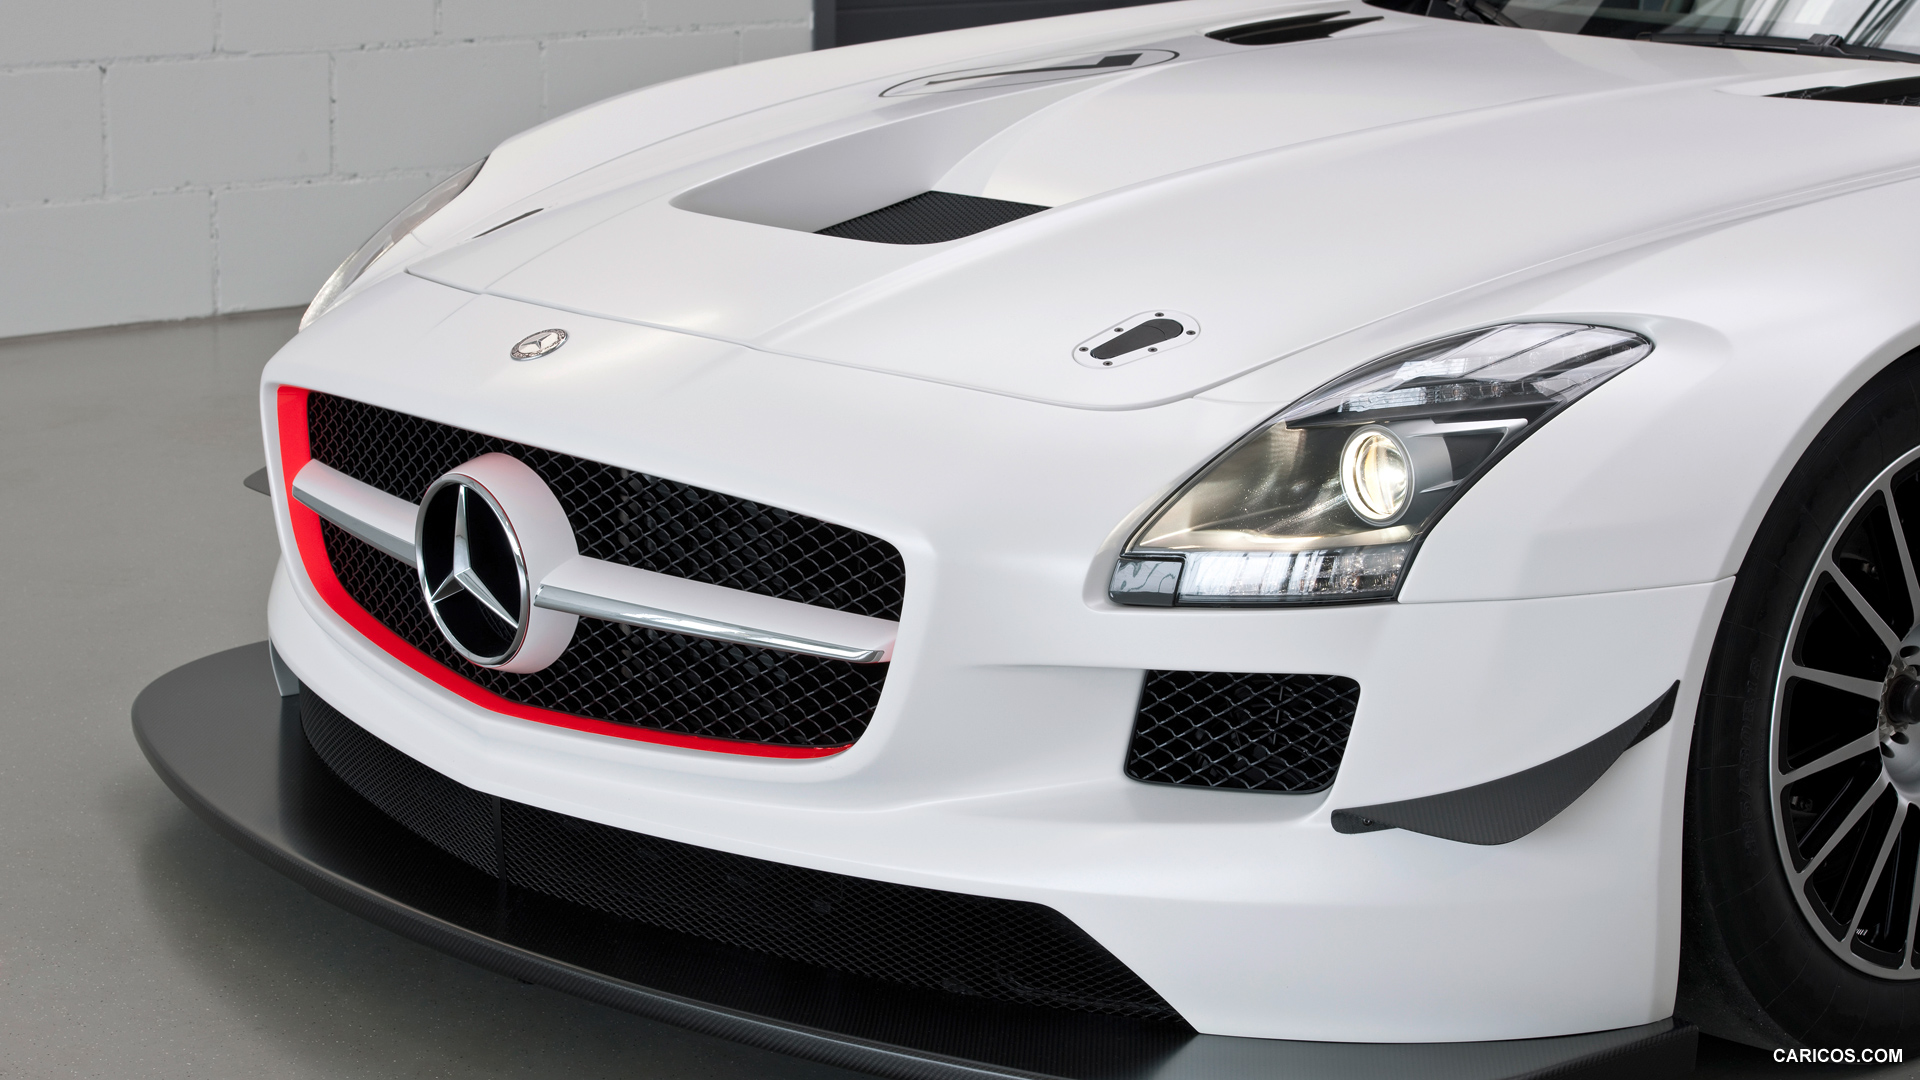 Mercedes-Benz SLS AMG GT3  - Front Angle View Photo, #19 of 30